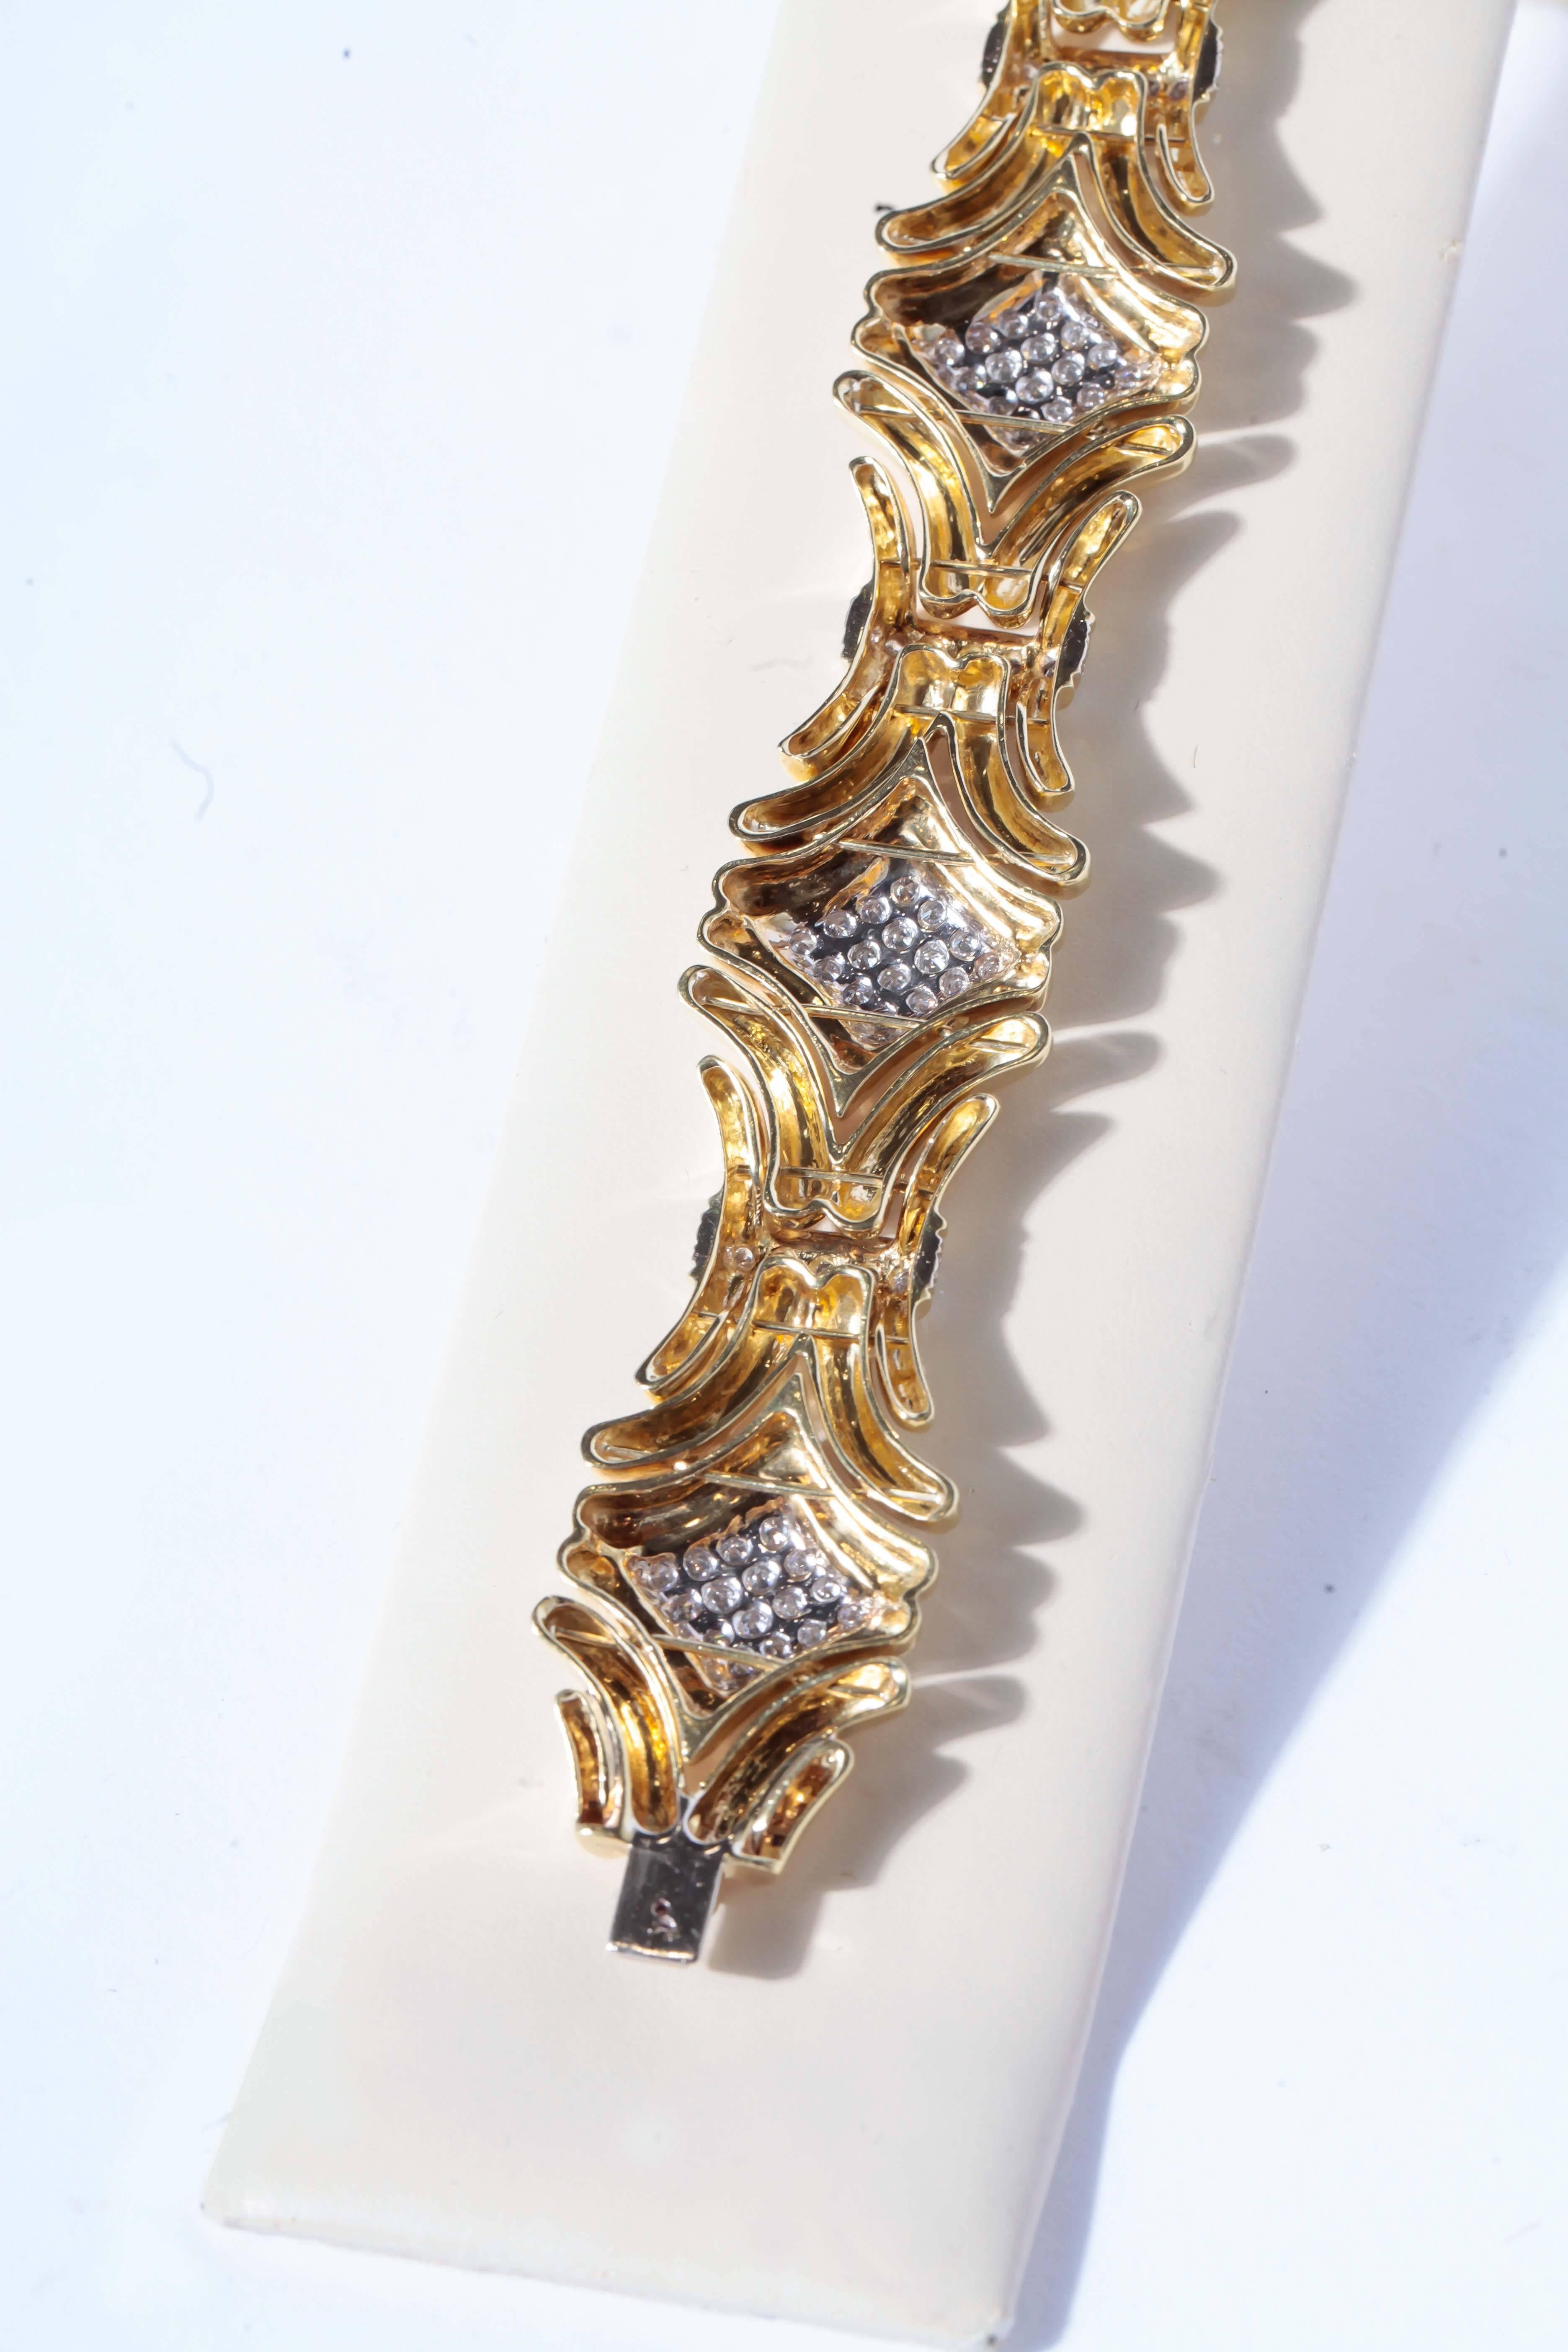 This is a spectacular 18 karat yellow gold and diamond link bracelet measuring 7 inches in length and 1 inch width. The round brilliant cut diamonds are pave set in diamond shapes with gold accents, and the links are connected with four diamond